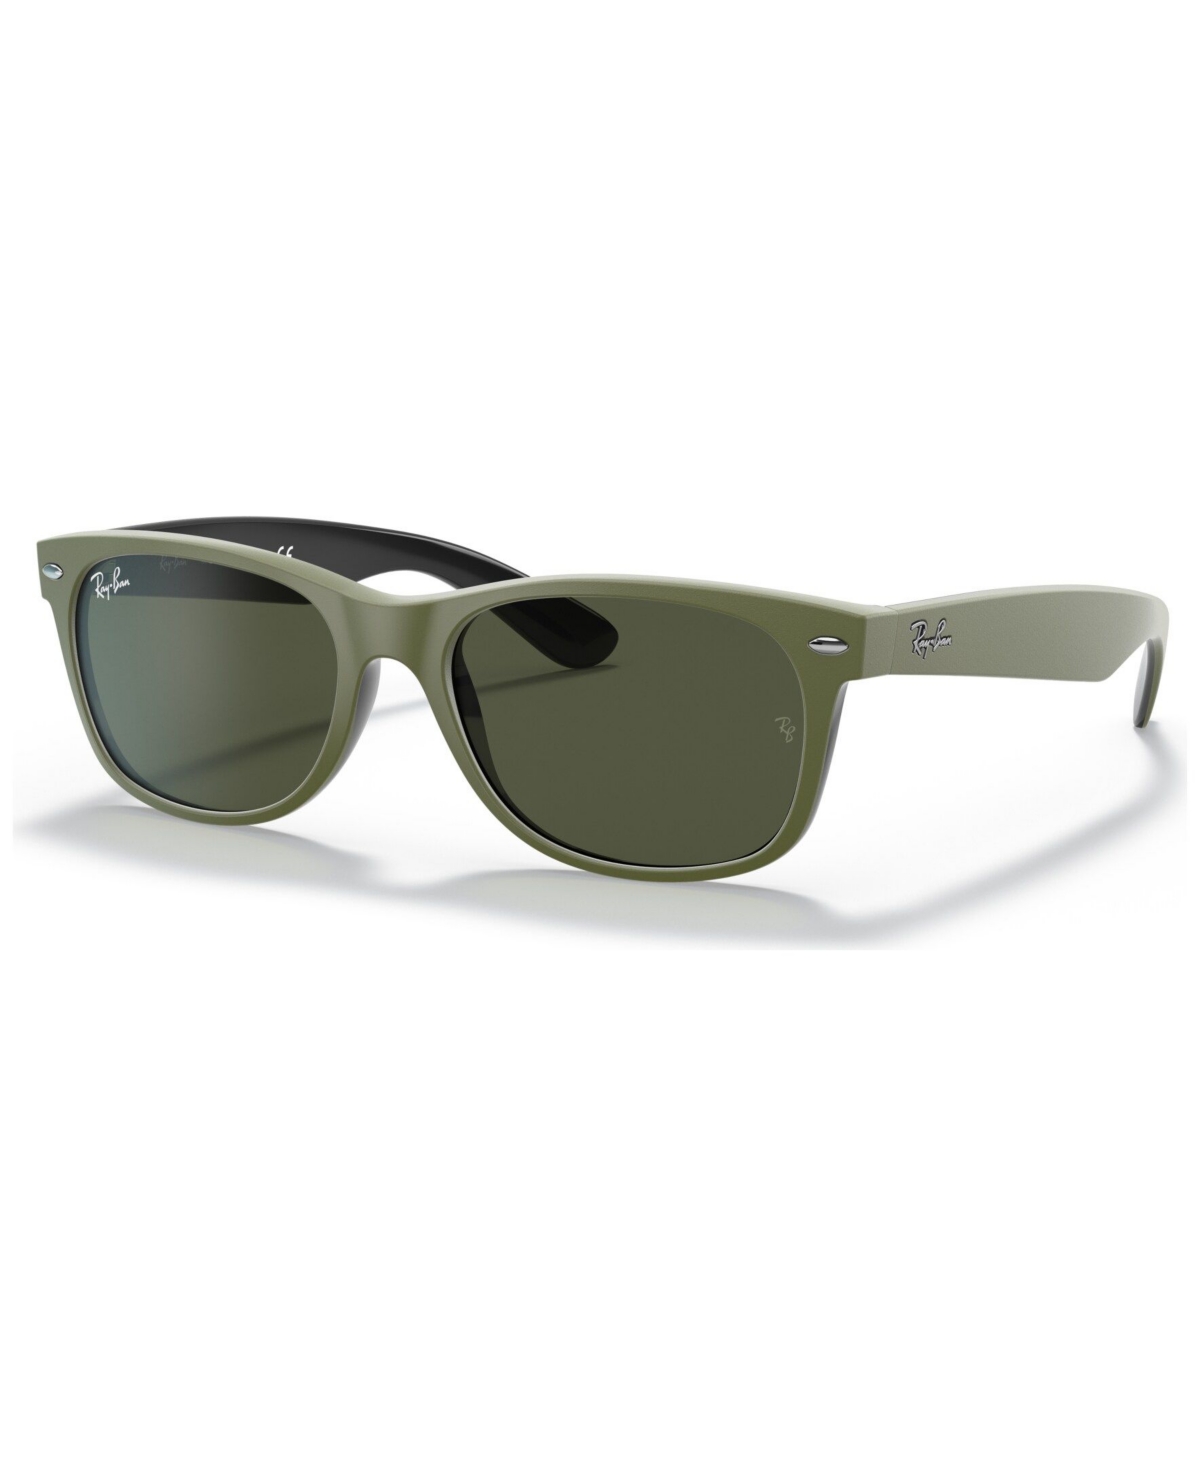 Ray Ban Unisex Sunglasses, Rb2132 New Wayfarer In Top Rubber Military Green On B,green